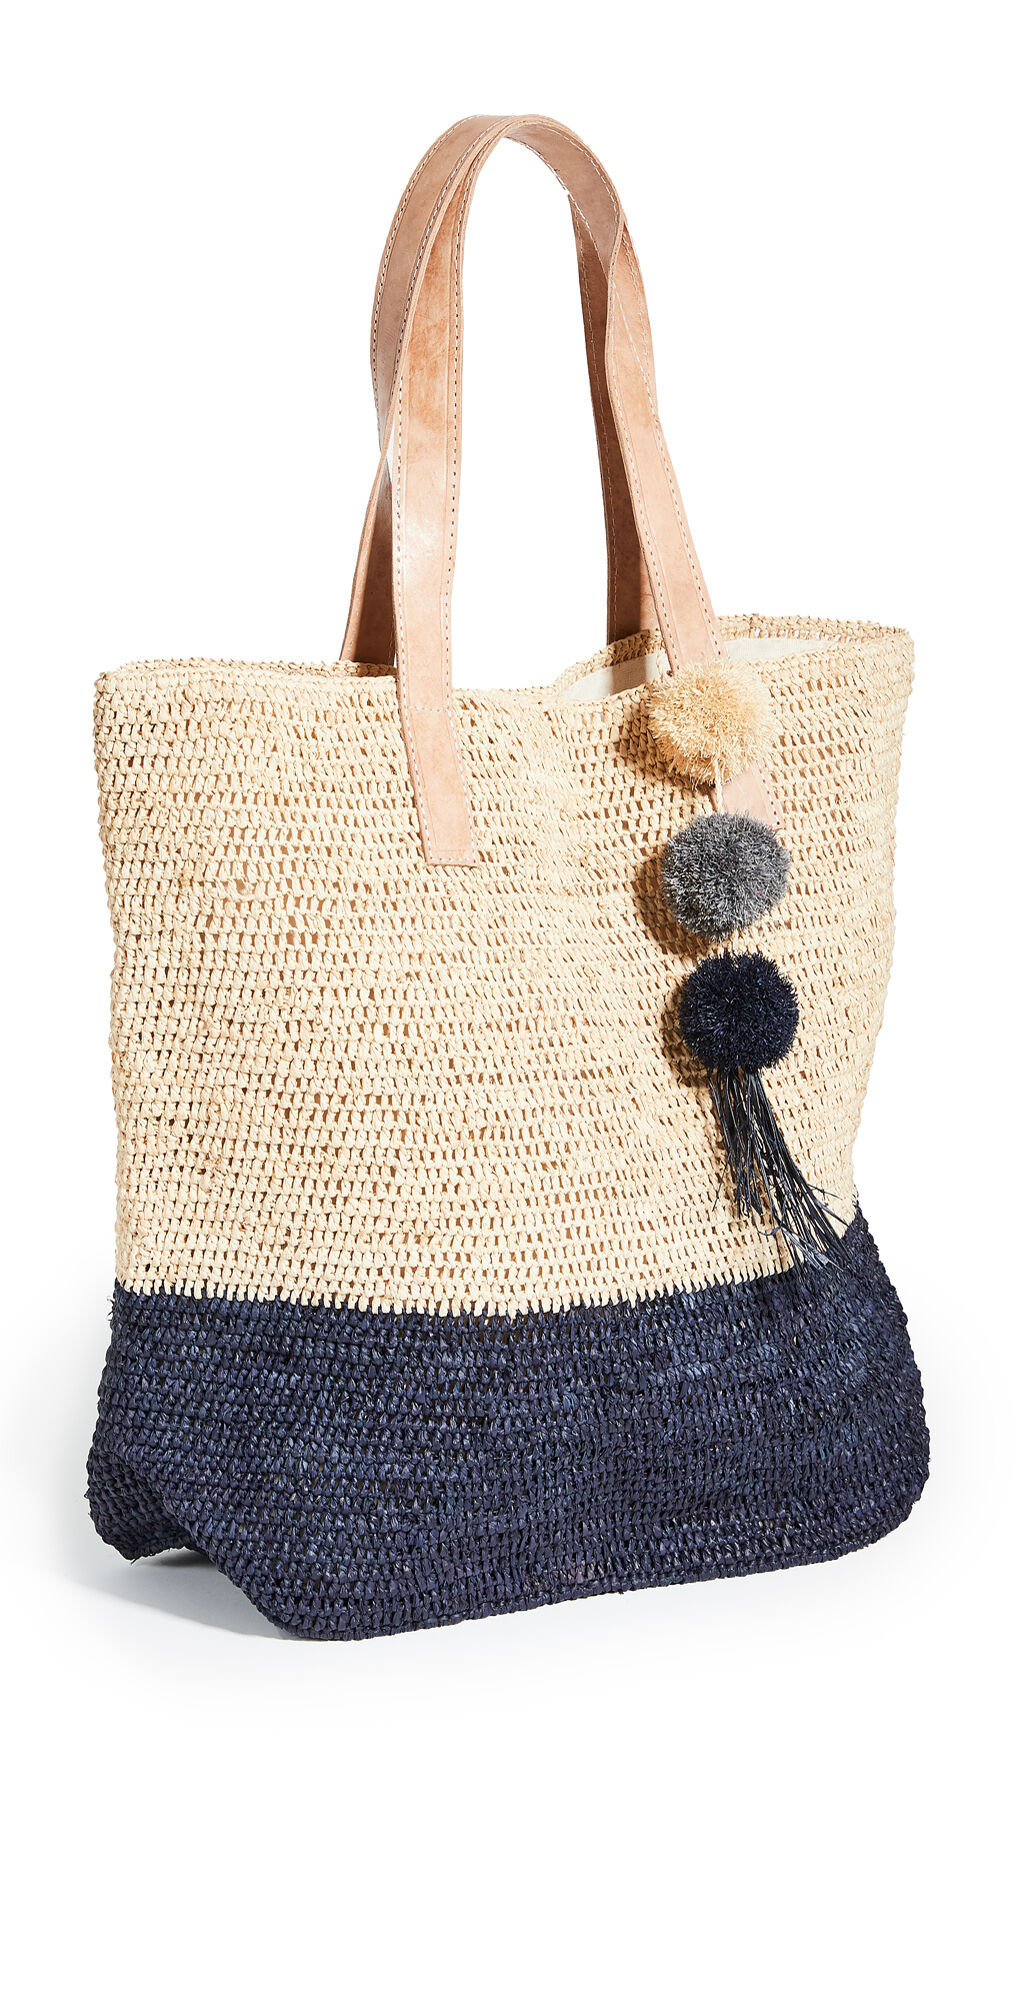 Mar Y Sol Montauk Tote Navy One Size  Navy  size:One Size